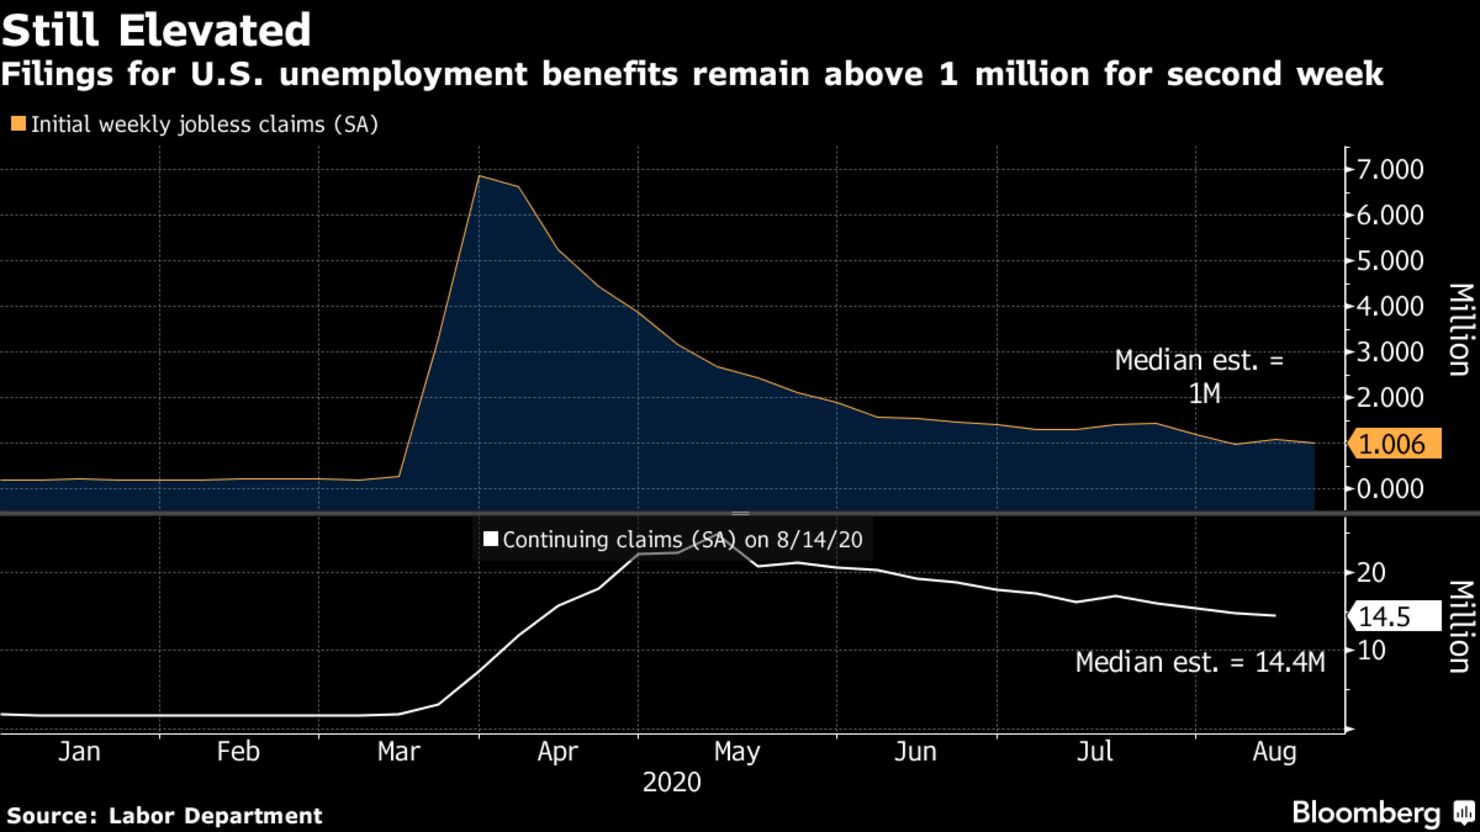 Filings for U.S. unemployment benefits remain above 1 million for second week